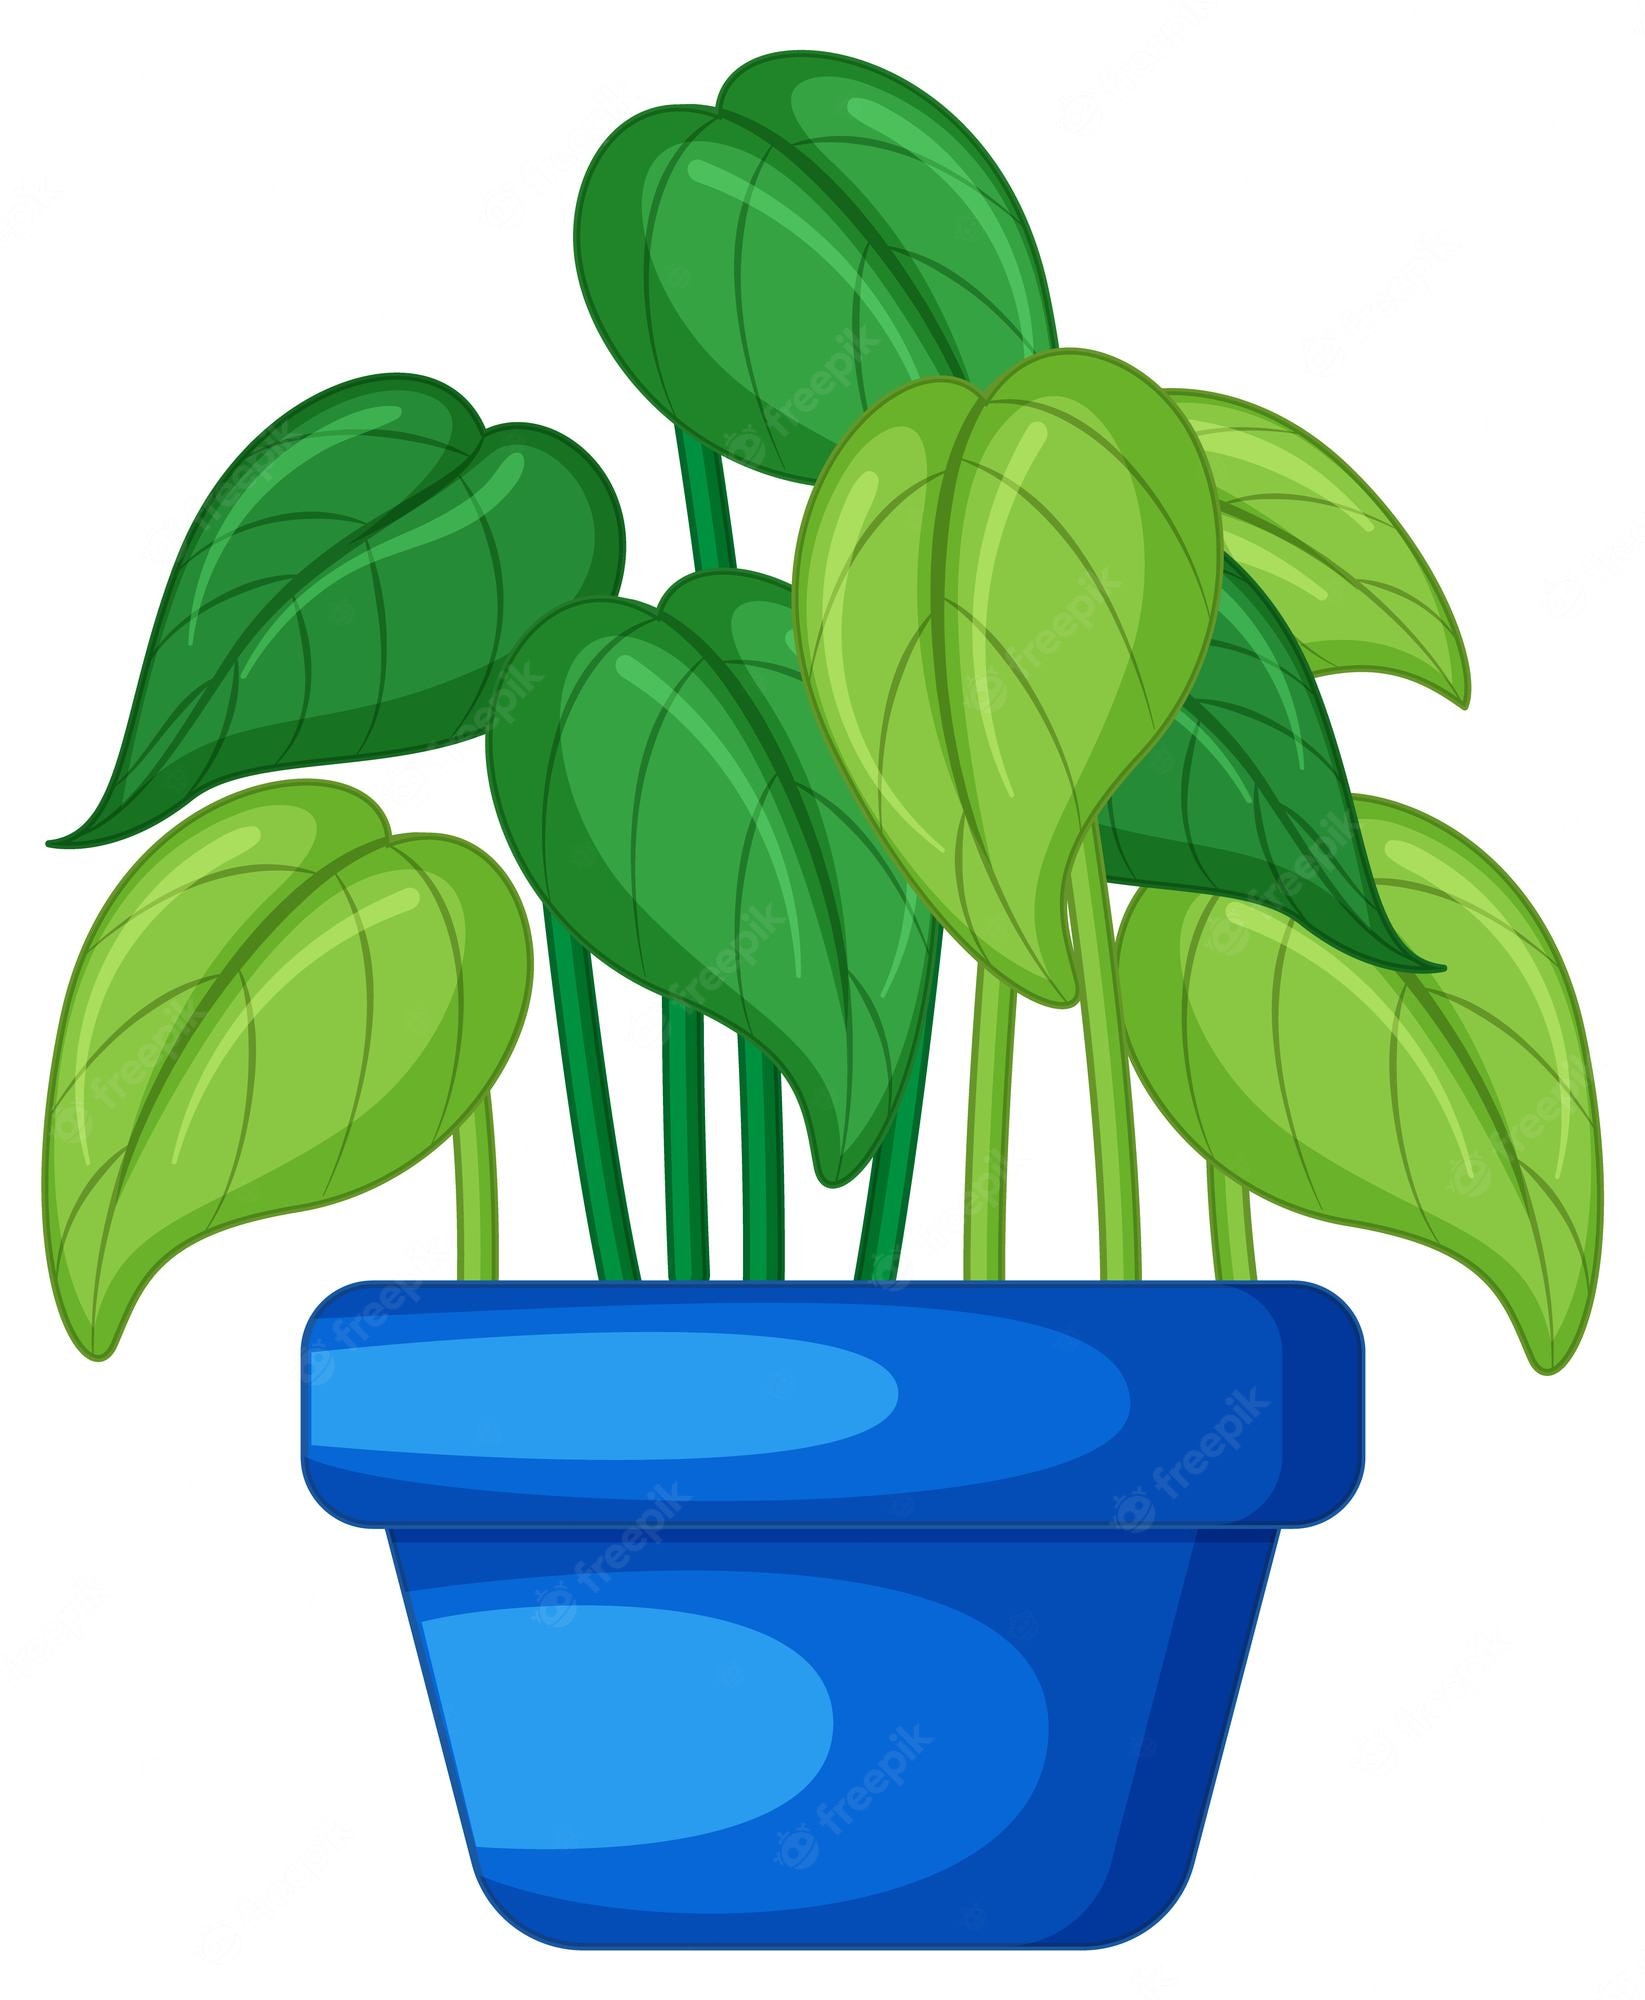 Plant Cartoon Images Wallpapers